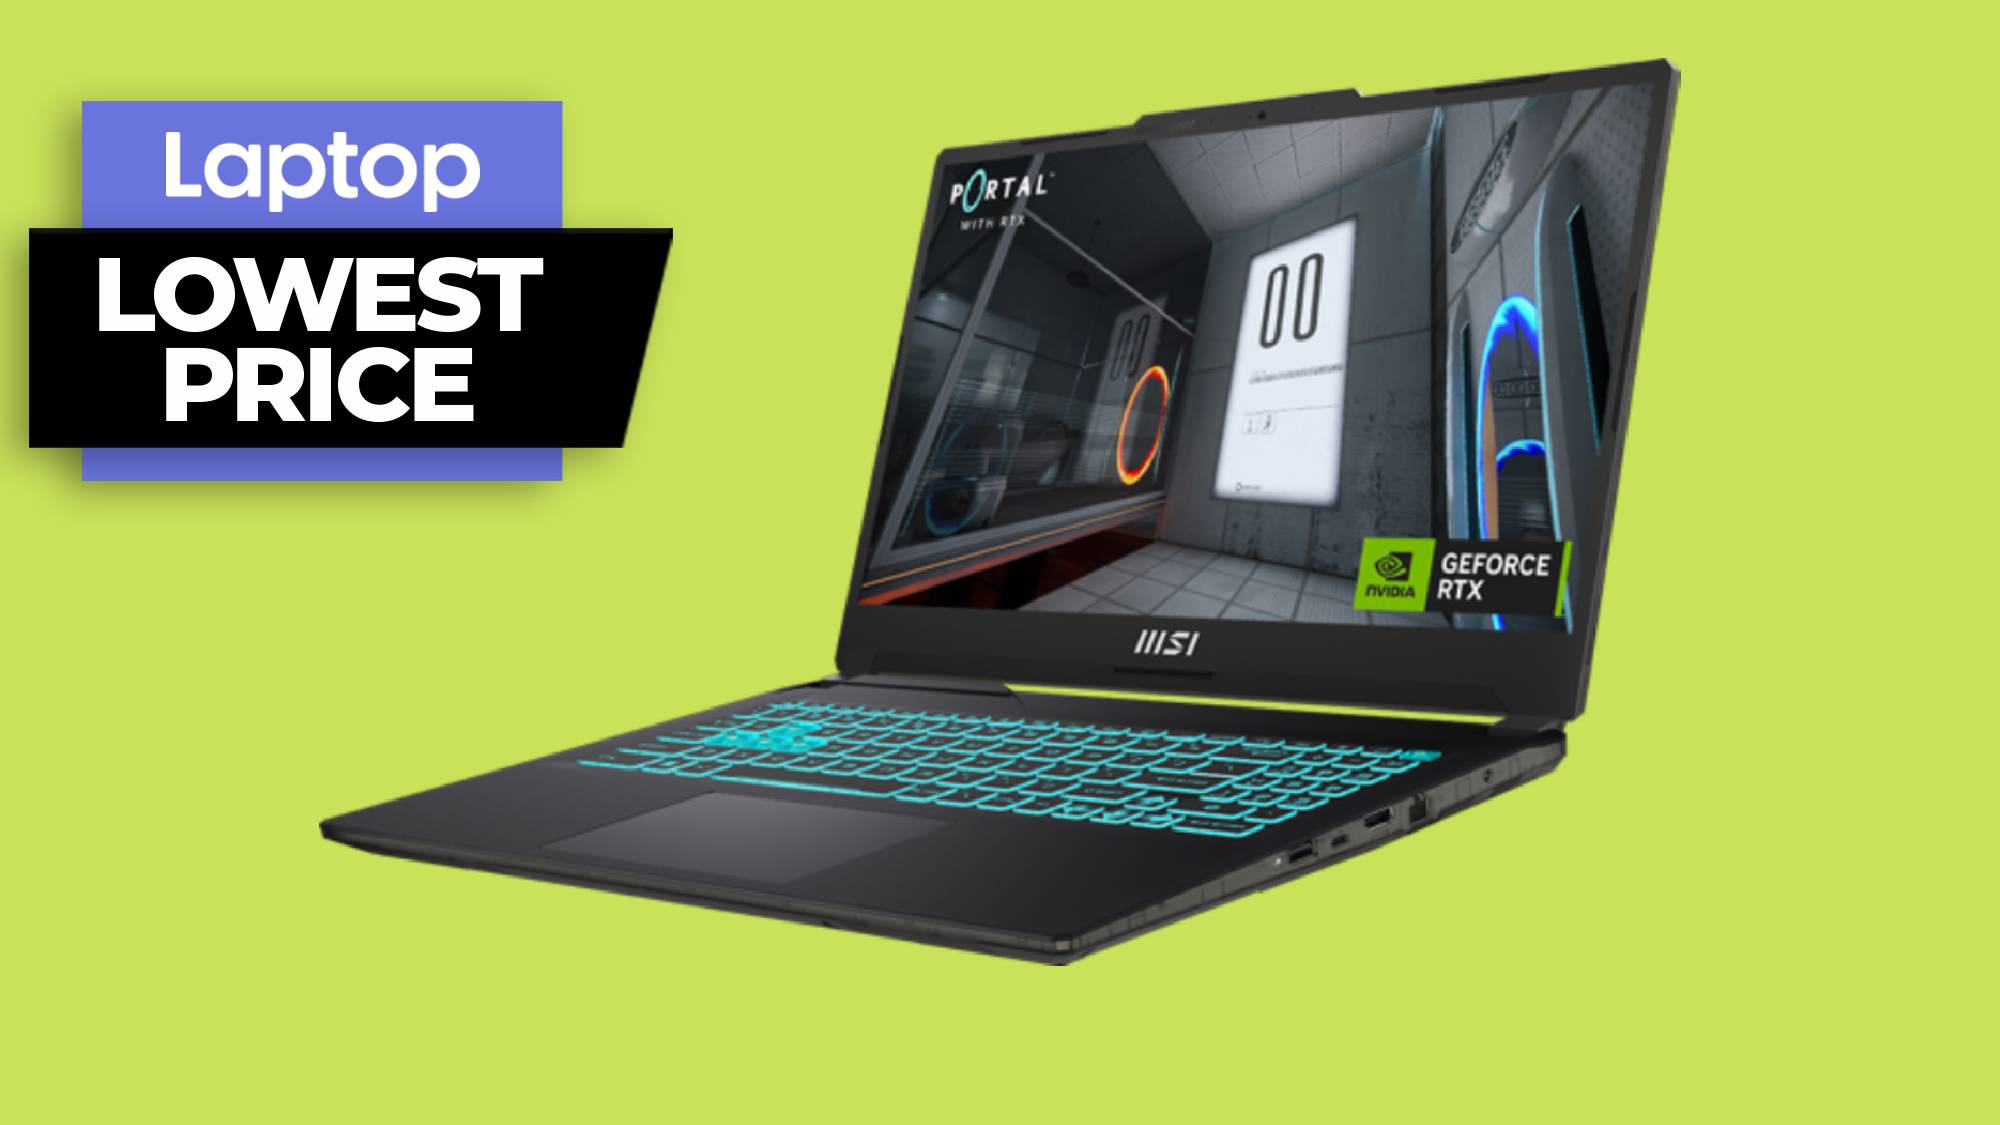 You can get over $1,000 OFF this RTX 4060 gaming laptop right now